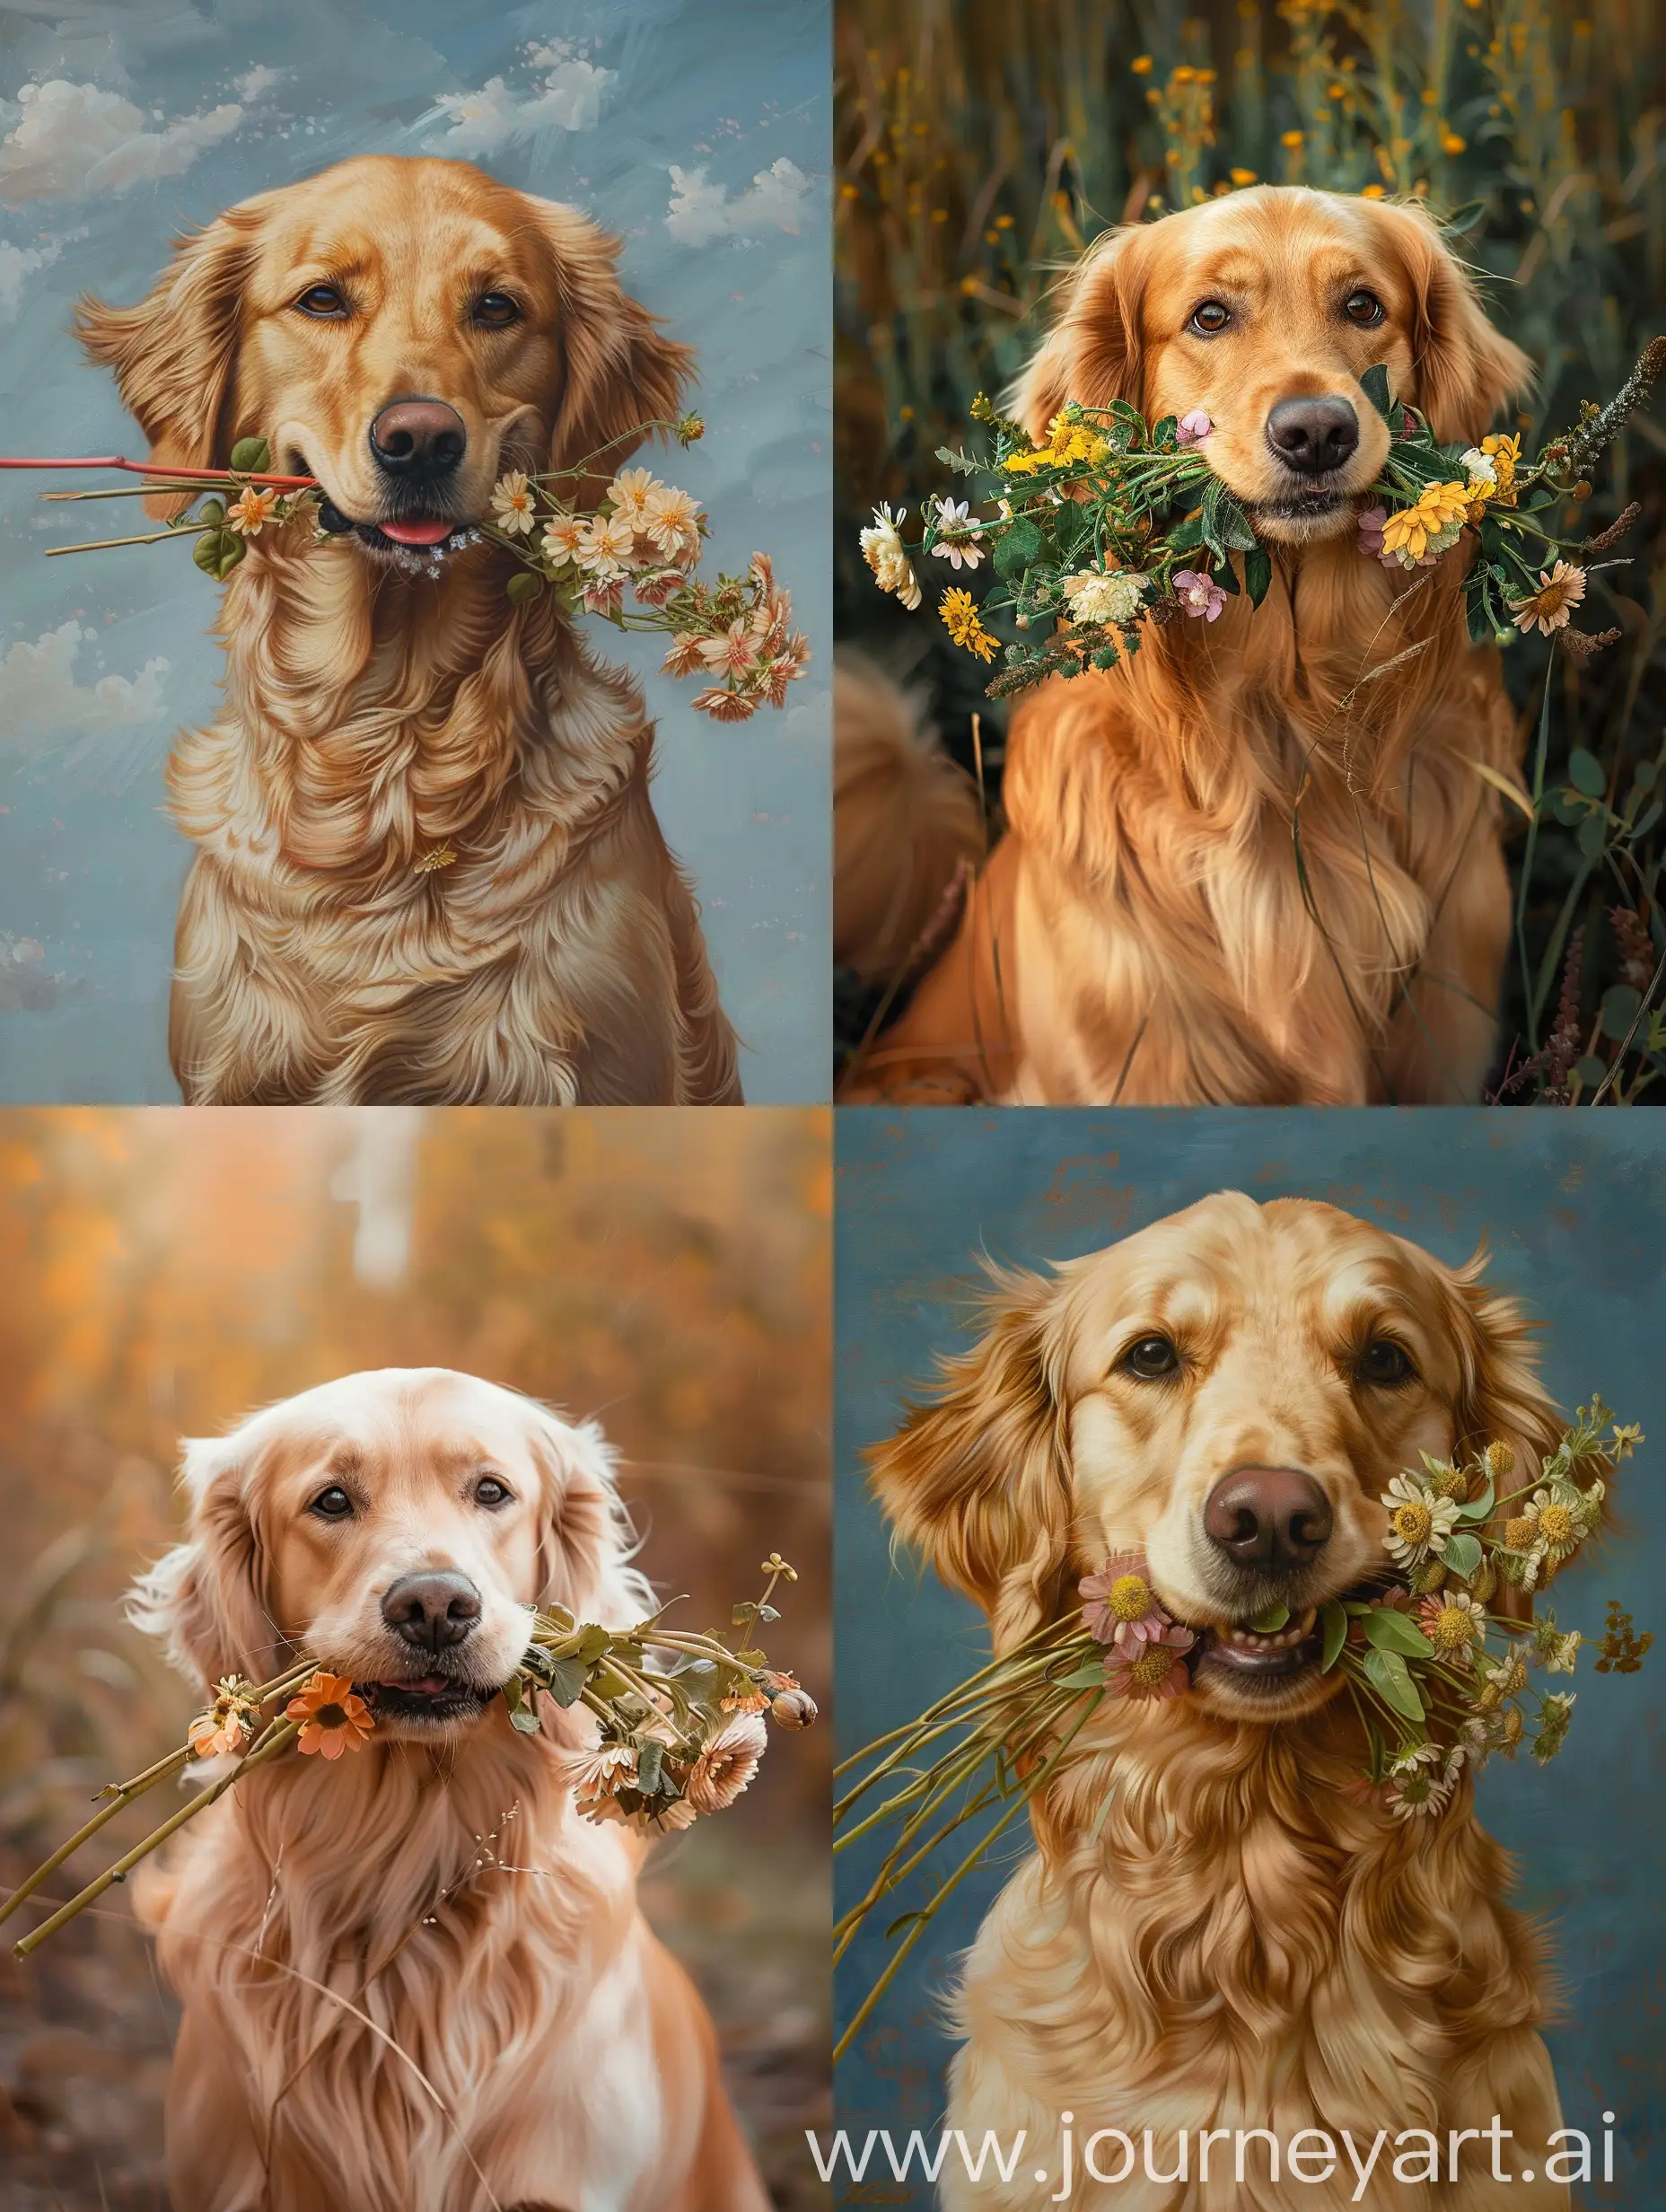 Golden-Retriever-Dog-Holding-Colorful-Flowers-in-Mouth